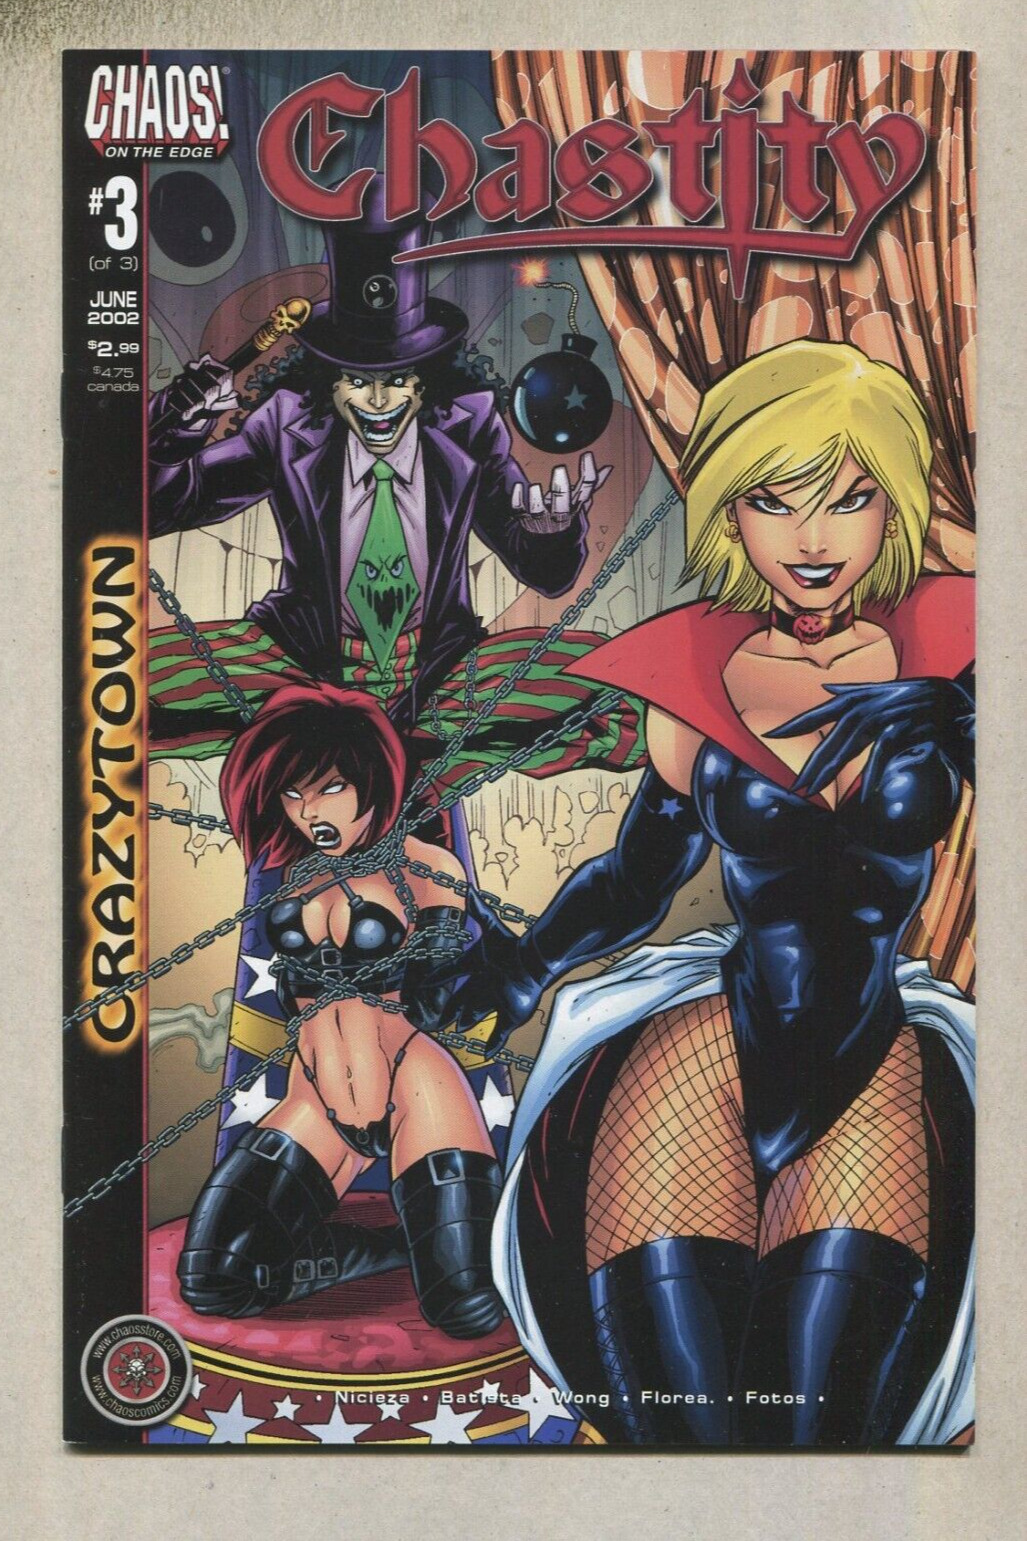 Chastity: #3 of 3  NM  \'Crazy Town\' Chaos Comics    D3